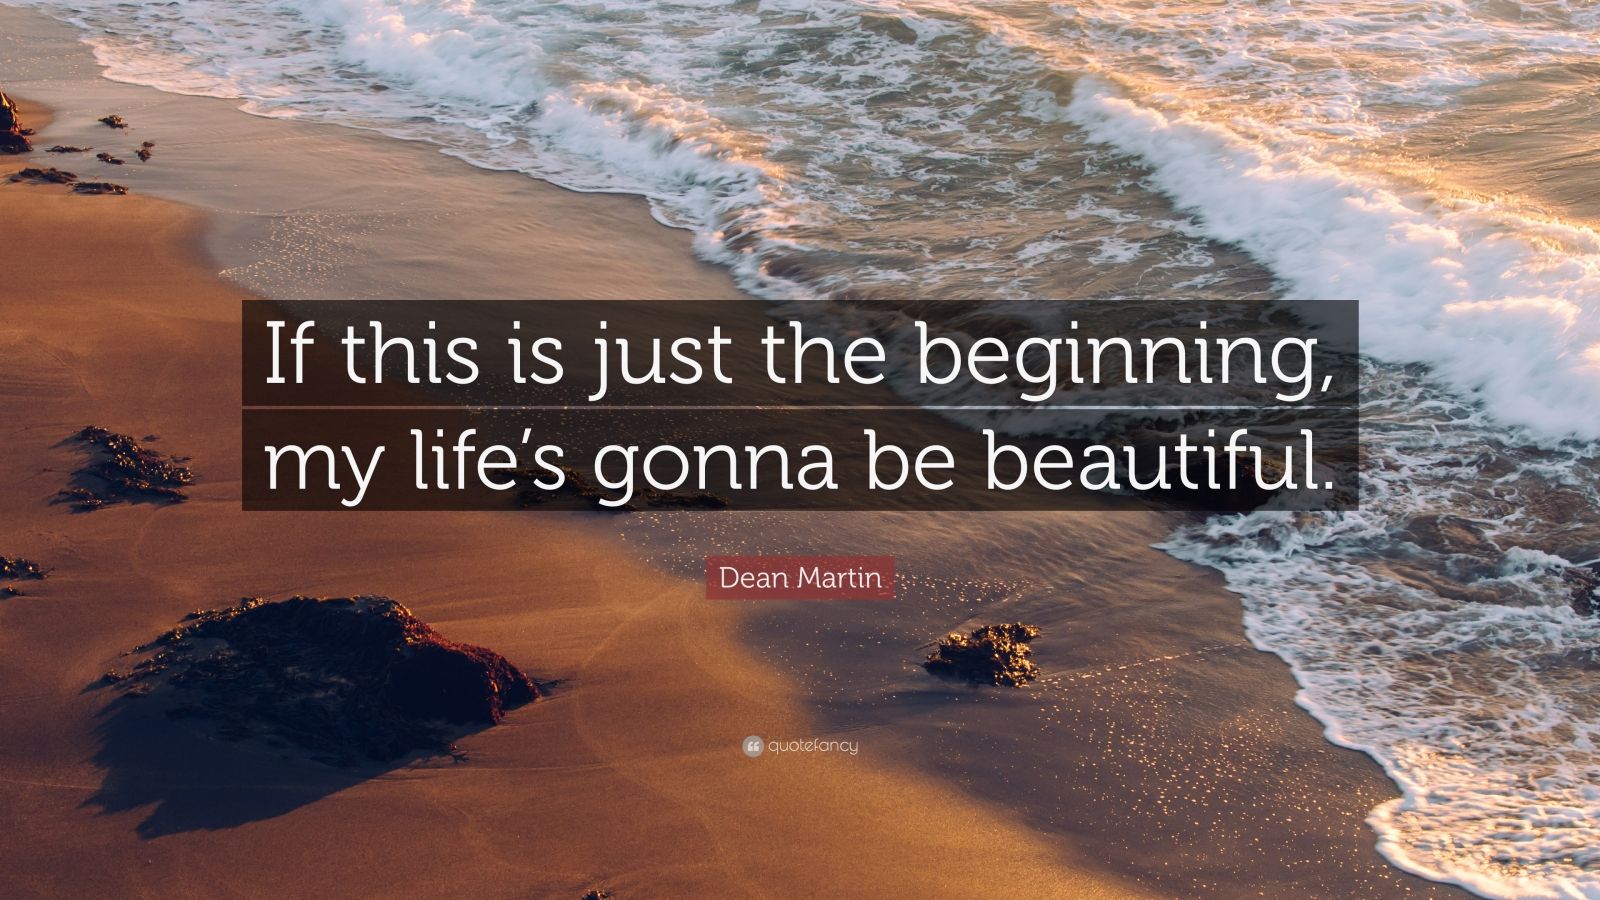 Dean Martin Quote: “If this is just the beginning, my life’s gonna be beautiful.”